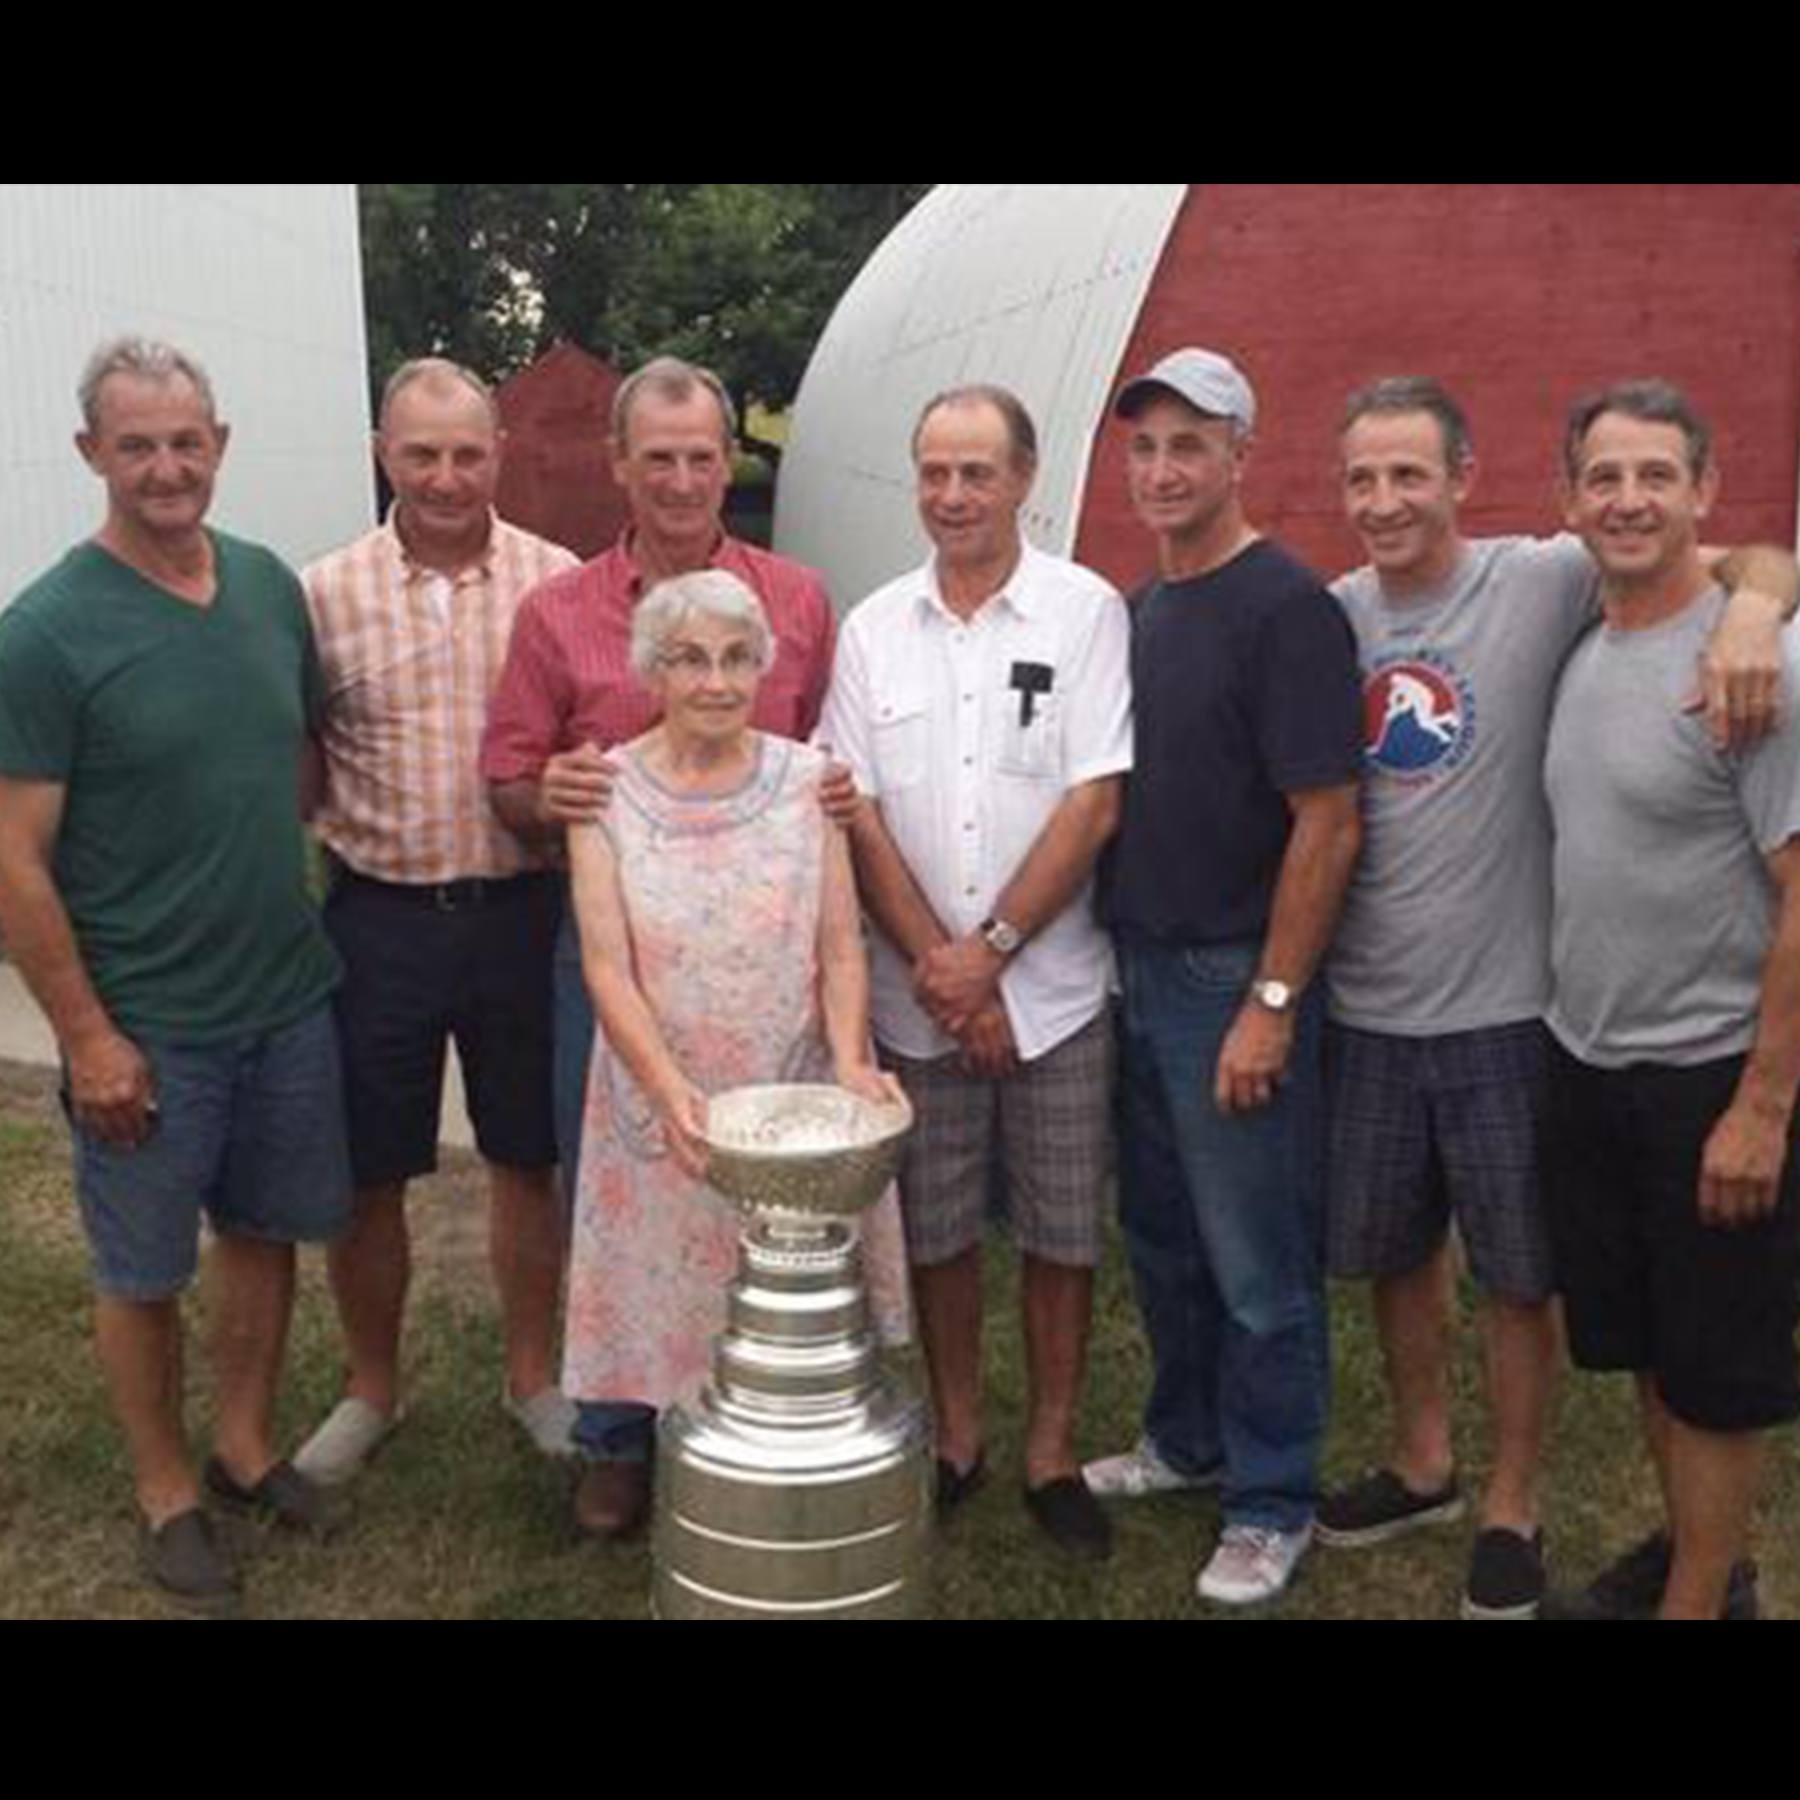 HONOUR - The Sutter family will be inducted into the Alberta Hockey Hall of Fame this summer.